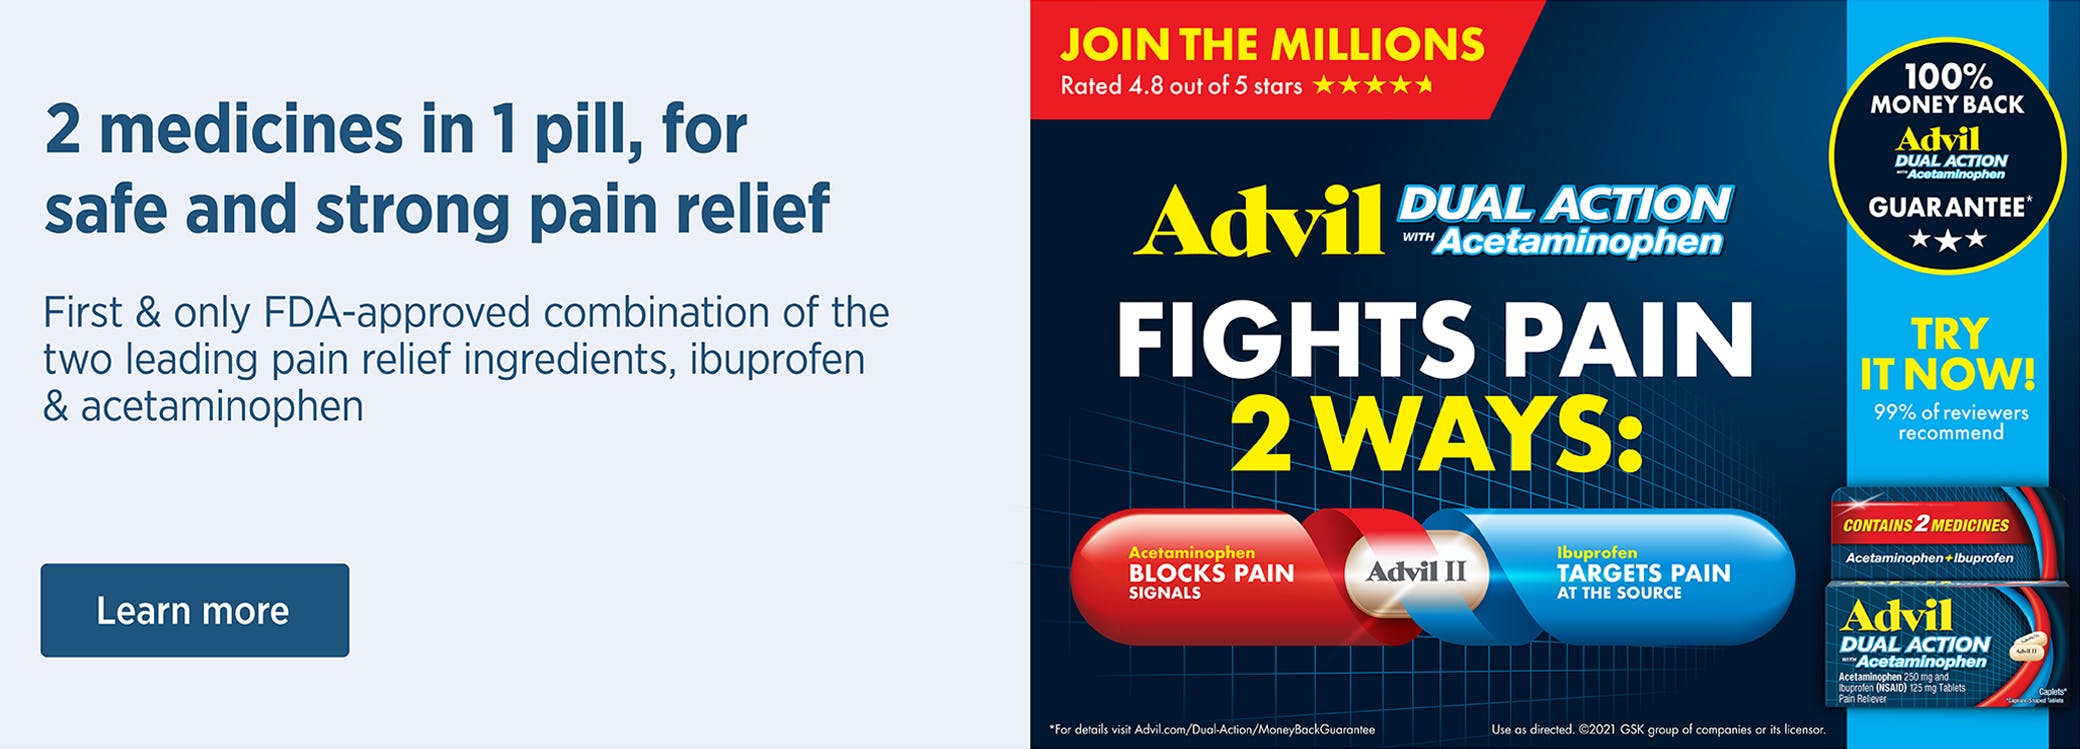 learn more advil dual action pain relief medicine